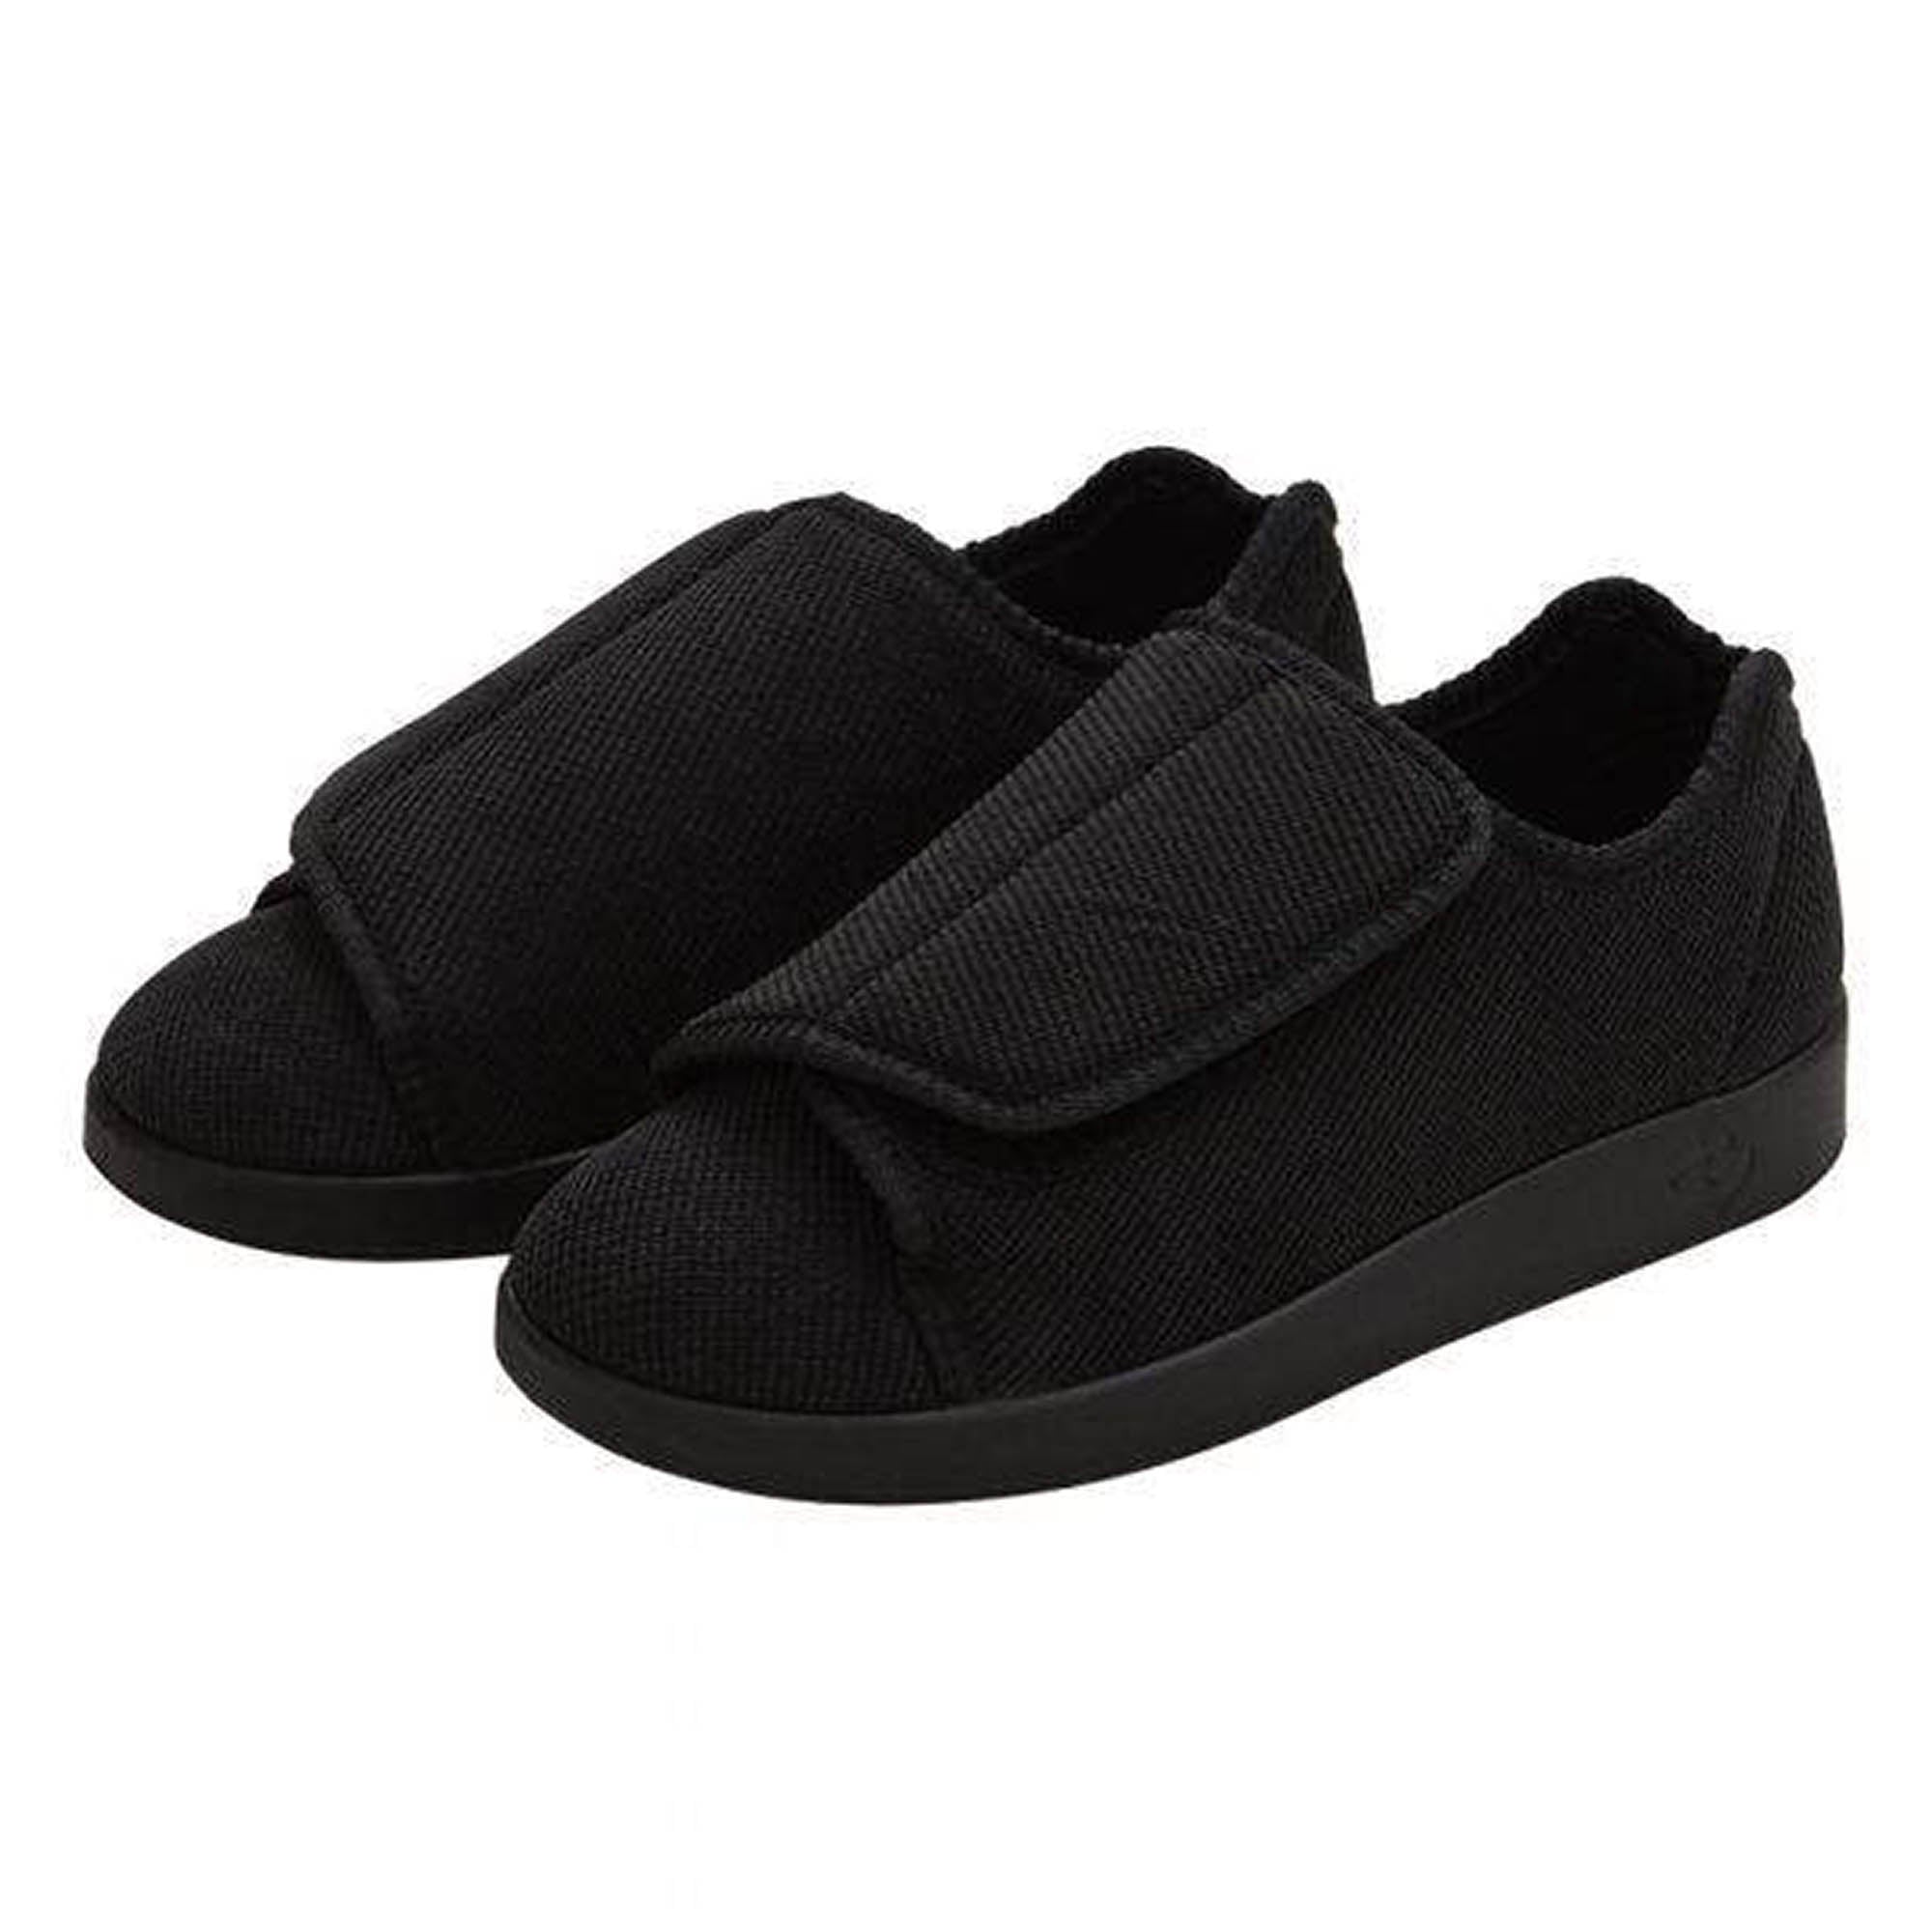 Silverts Women's Antimicrobial Extra Extra Wide Easy-Closure Slippers - Black - 10